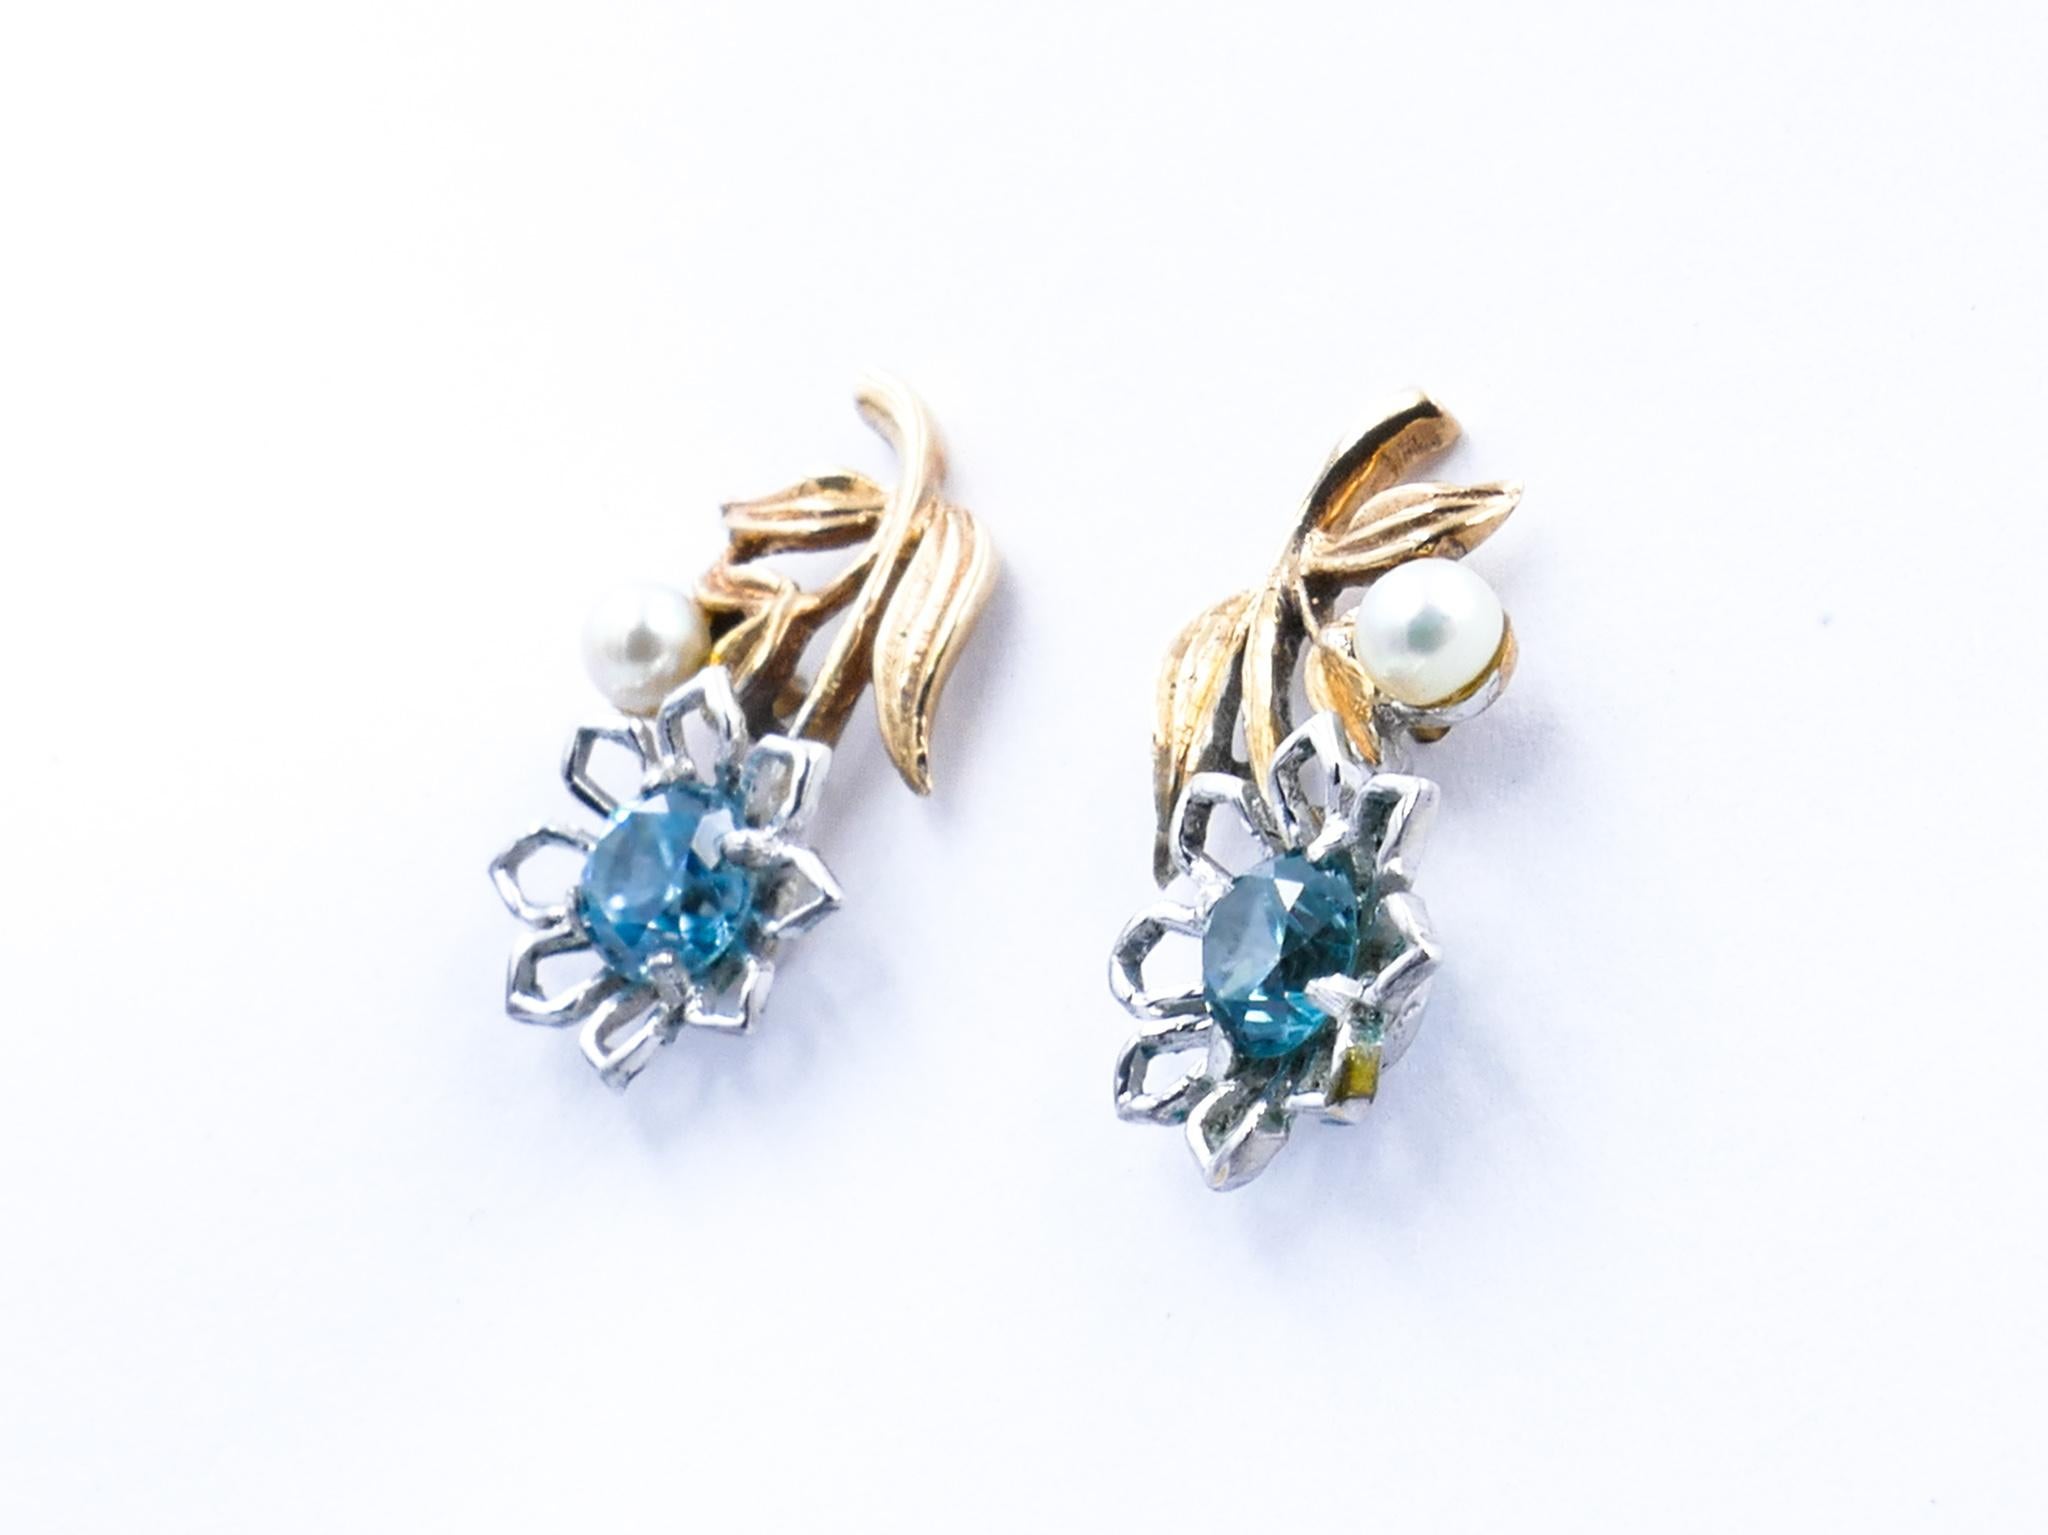 Something just a little bit different!
Vivid, vivid blue Aquamarines are the attraction in these gorgeously feminine 'Flower style' Vintage Earrings, embellished with one creamy/white Seed Pearl each with very good lustre.                           